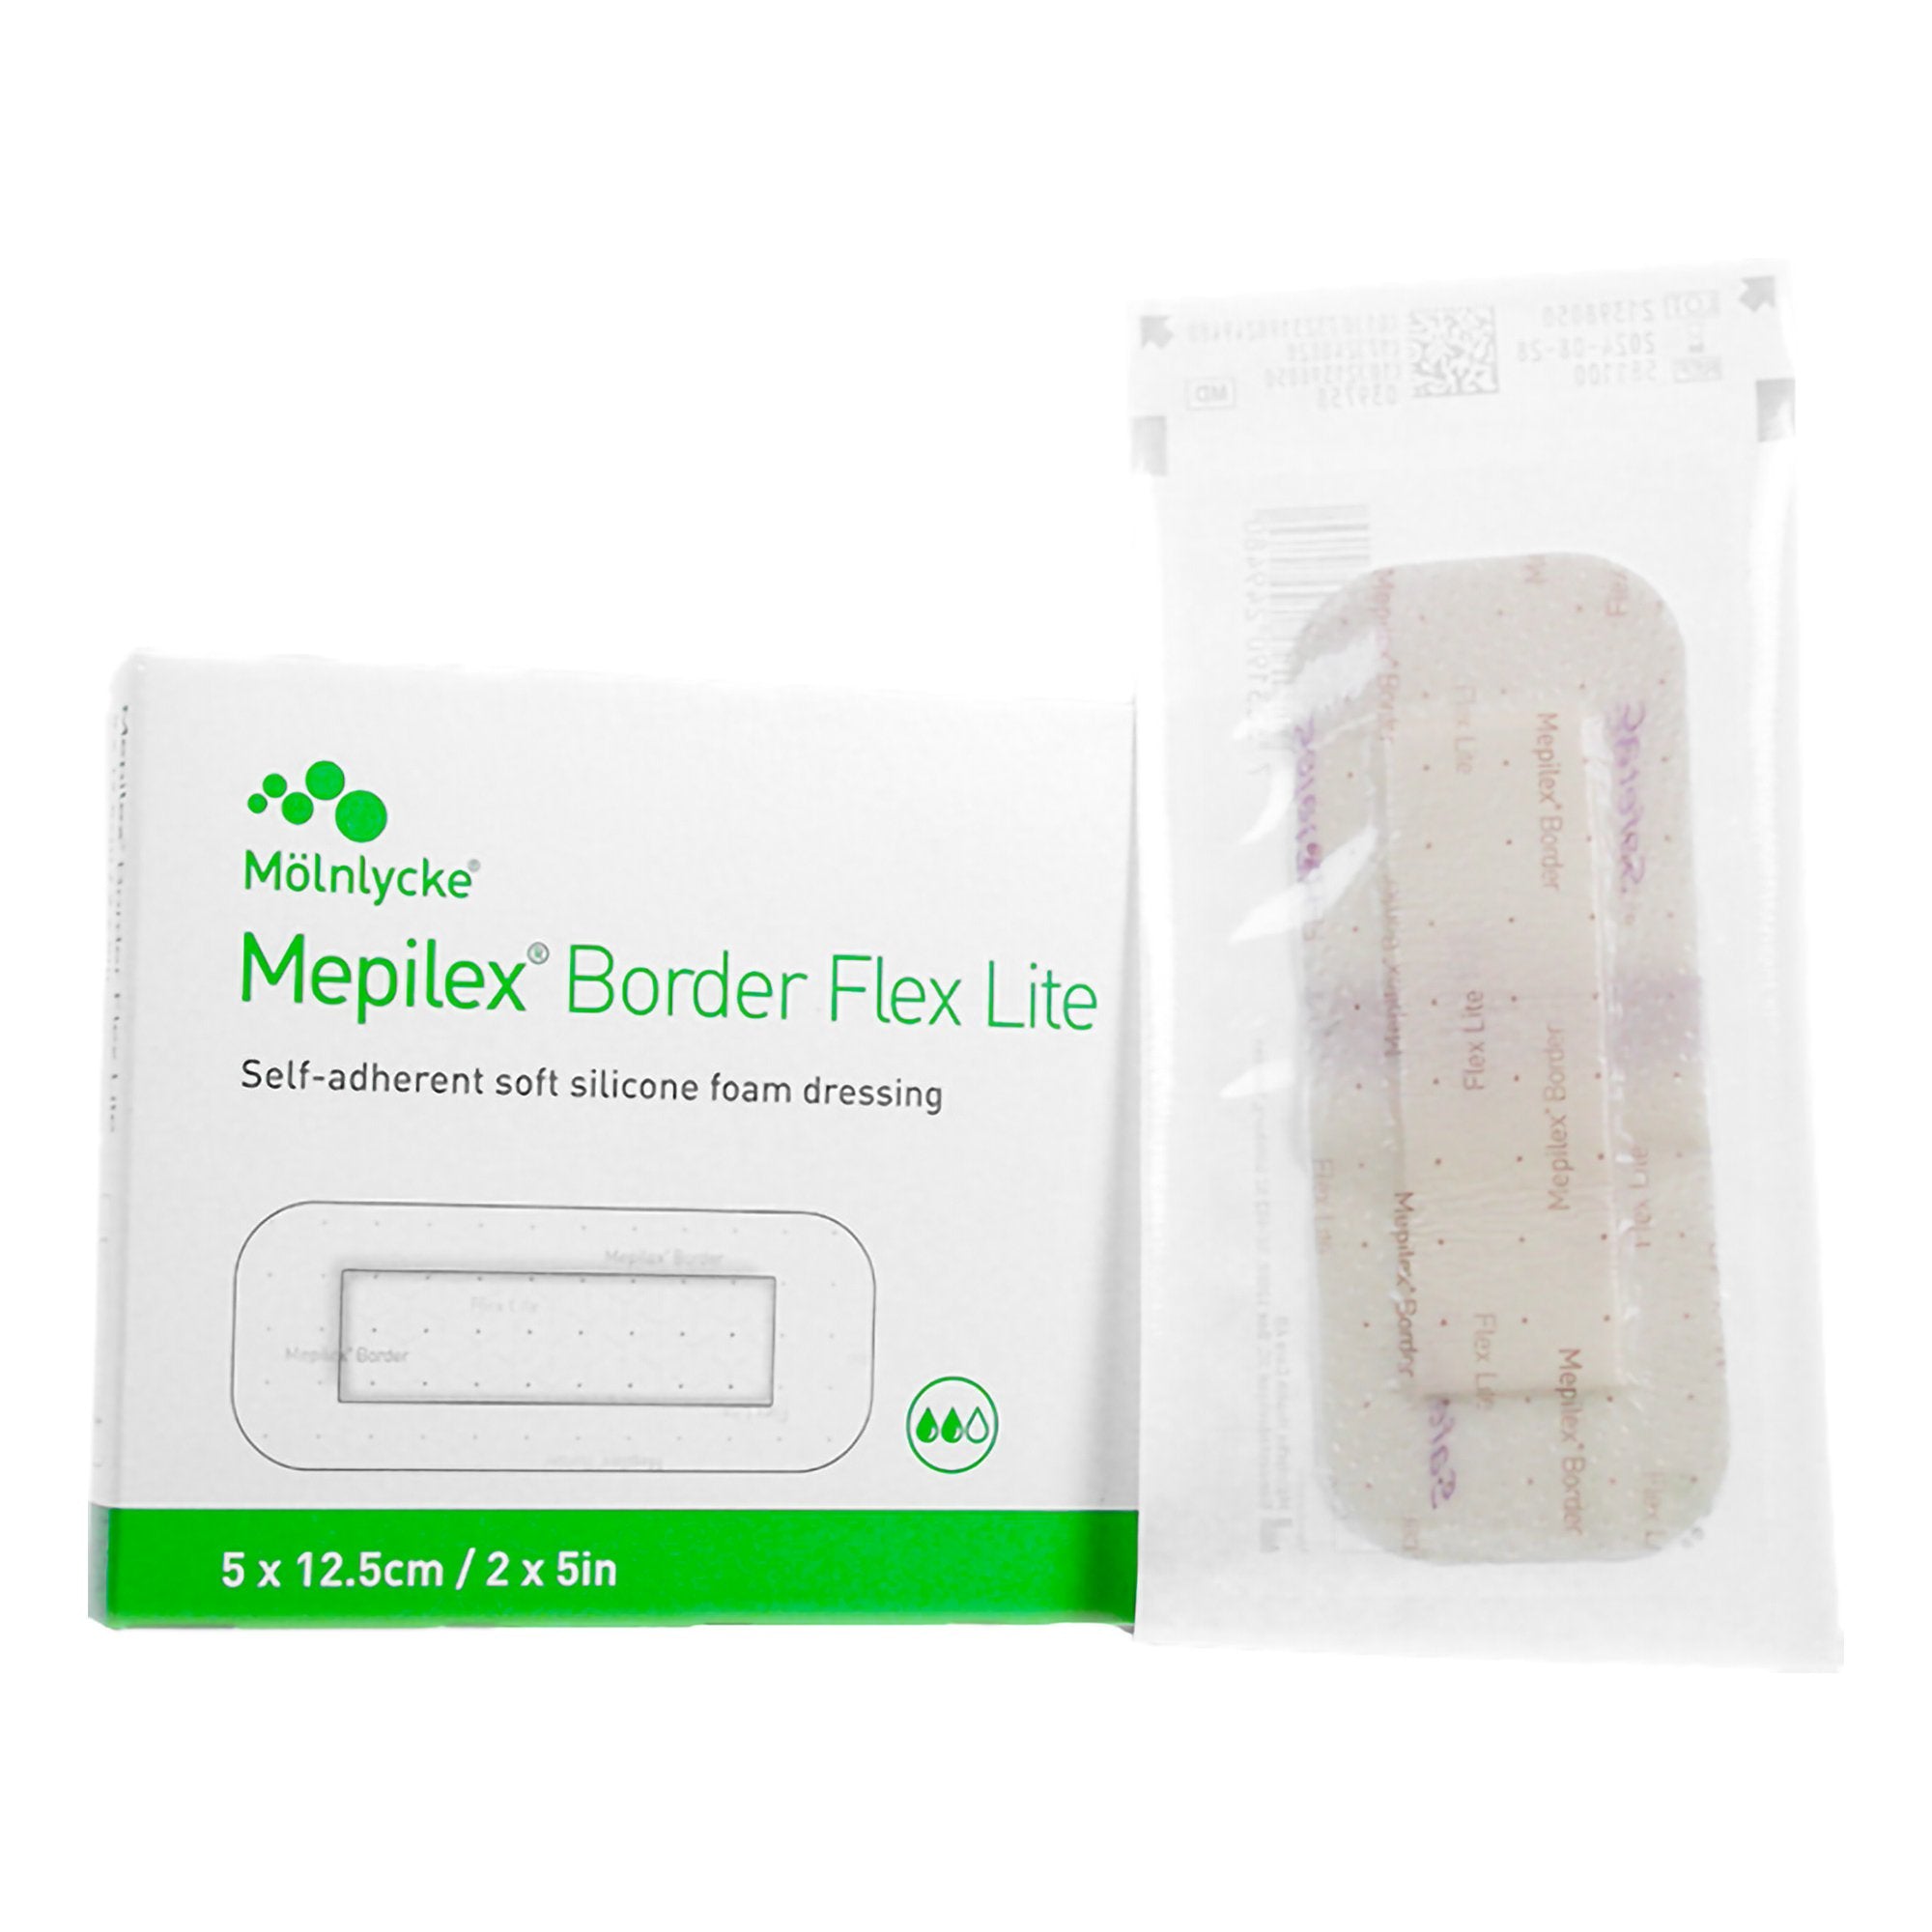 Thin Foam Dressing Mepilex® Border Flex Lite 2 X 5 Inch With Border Film Backing Silicone Adhesive Rectangle Sterile